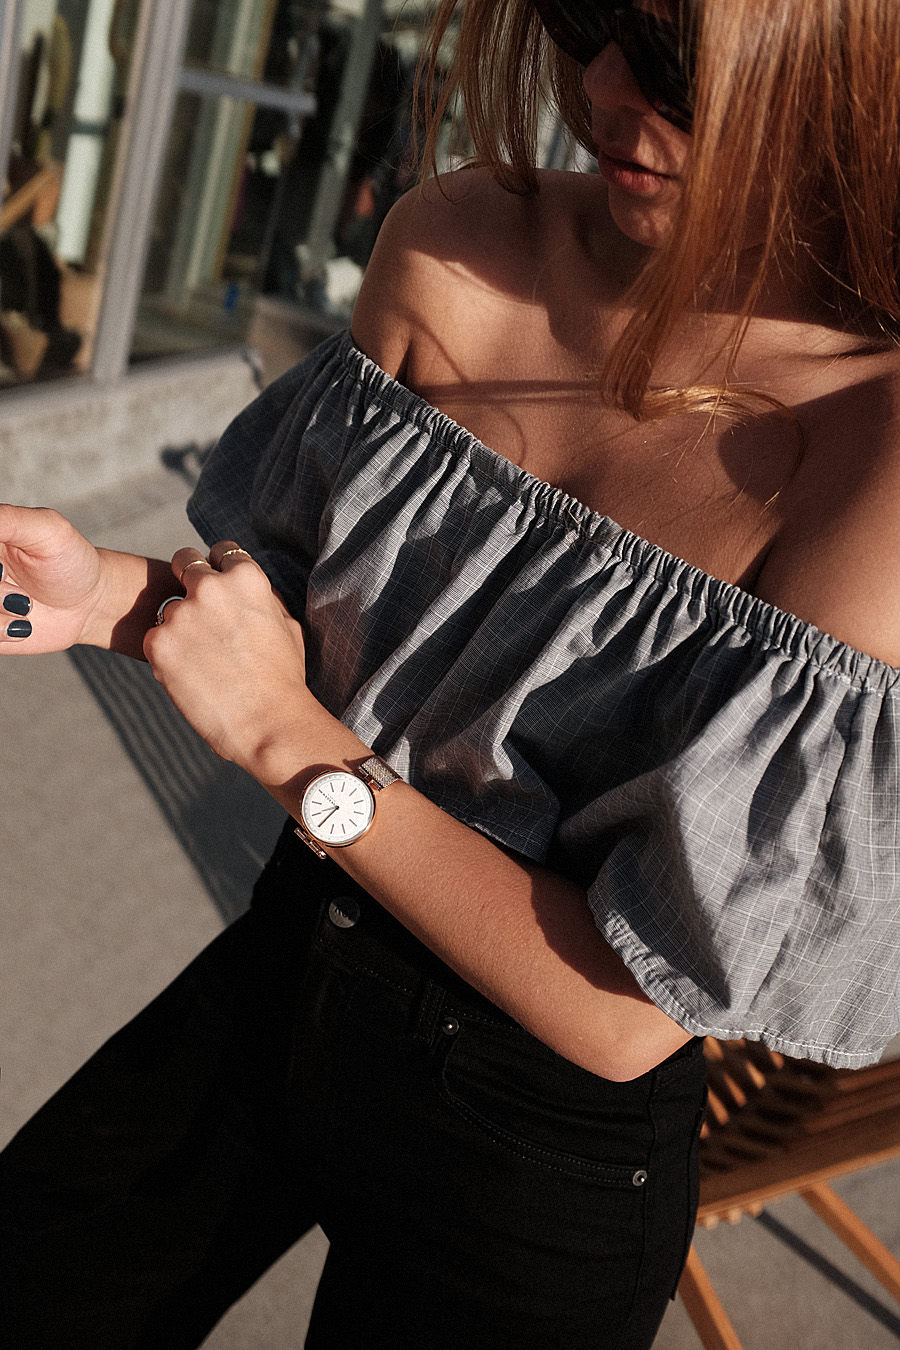 L.A. Hours with SKAGEN + Giveaway